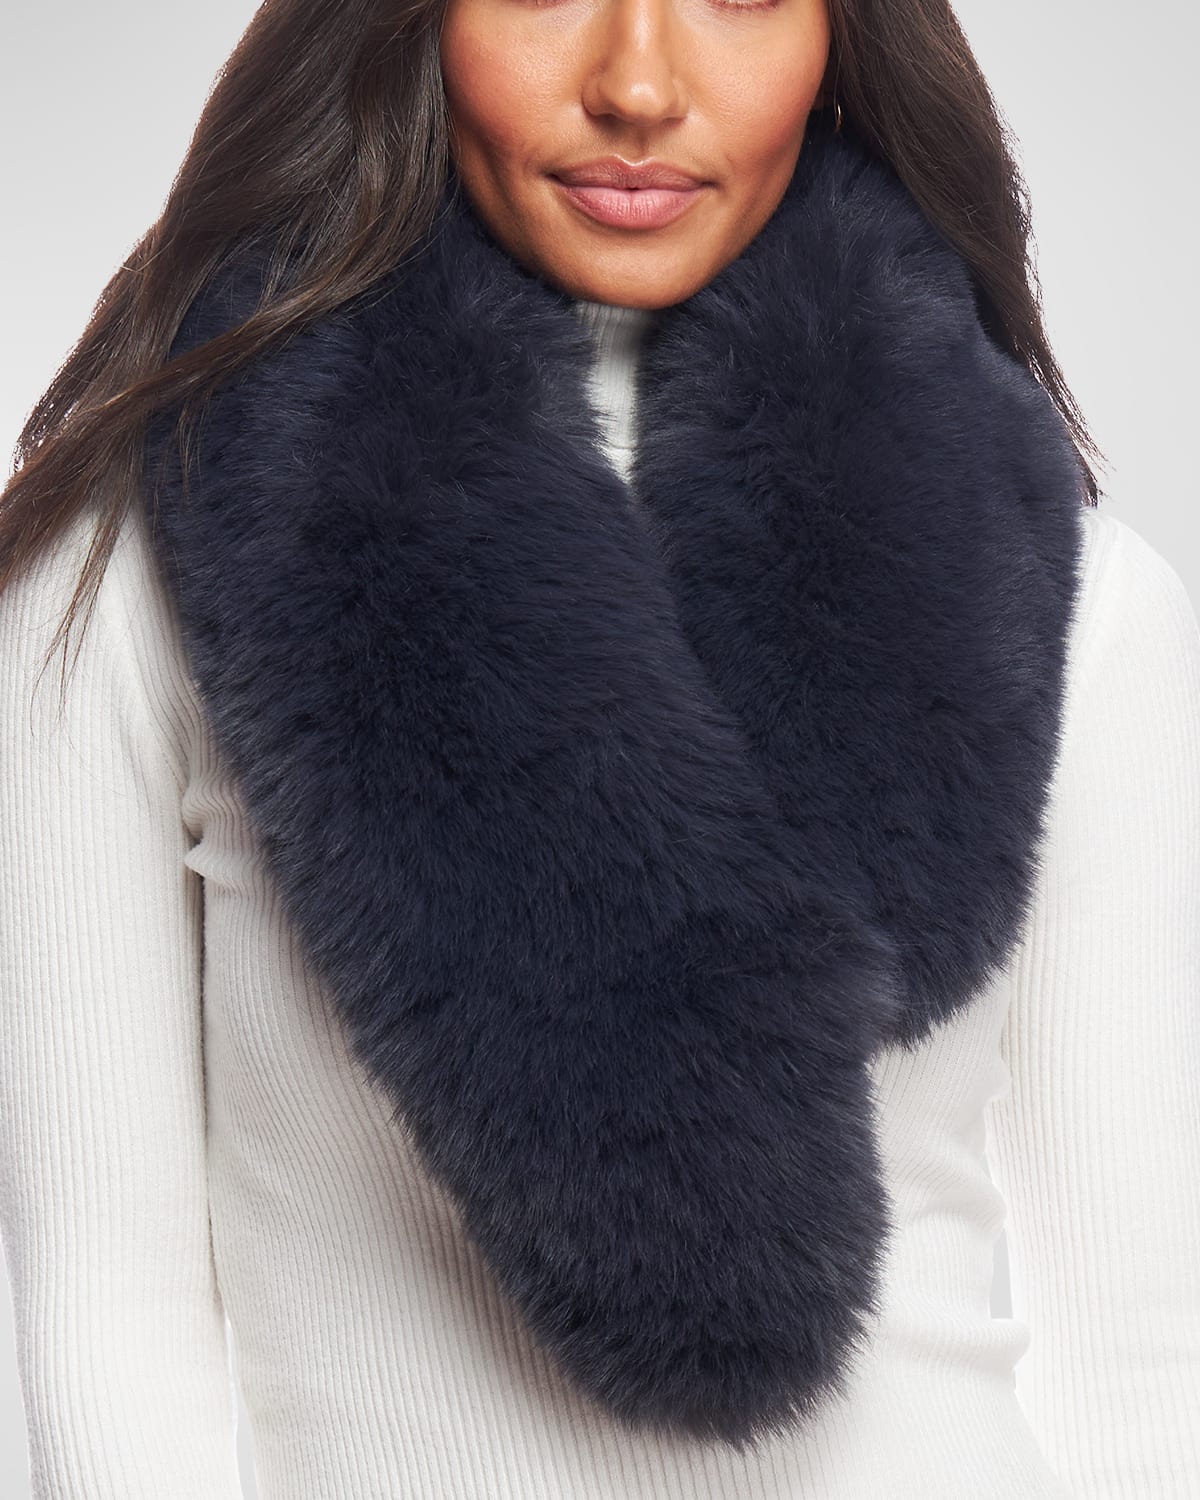 Fabulous Furs Chateau Faux Fur Clip Scarf In Midnight